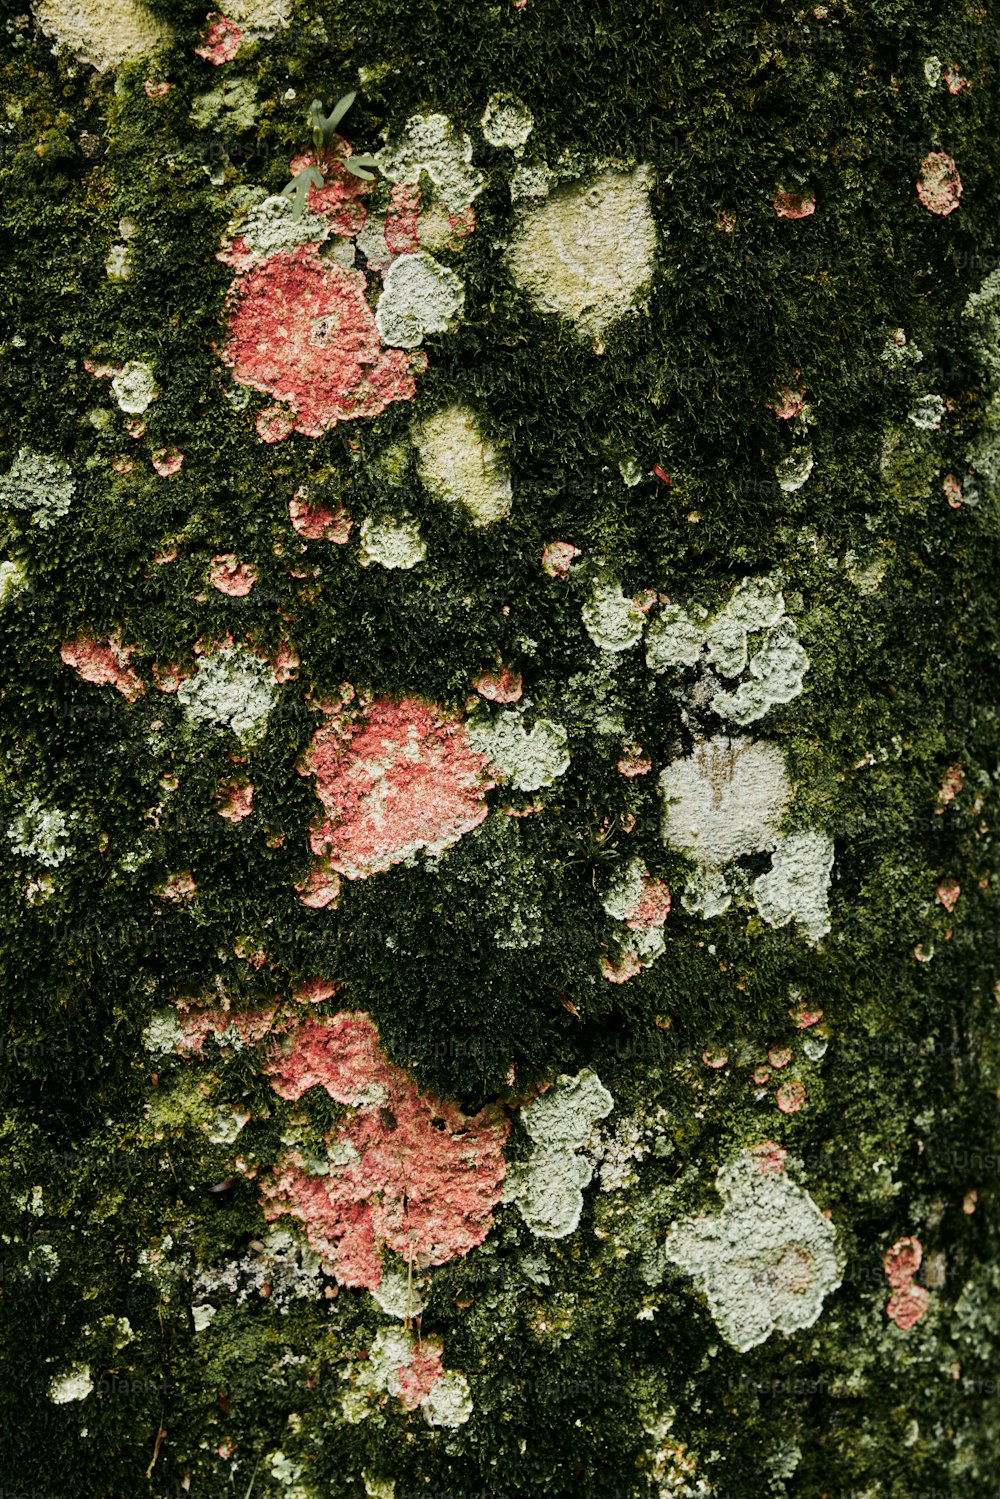 a close up of a mossy surface with pink and white flowers